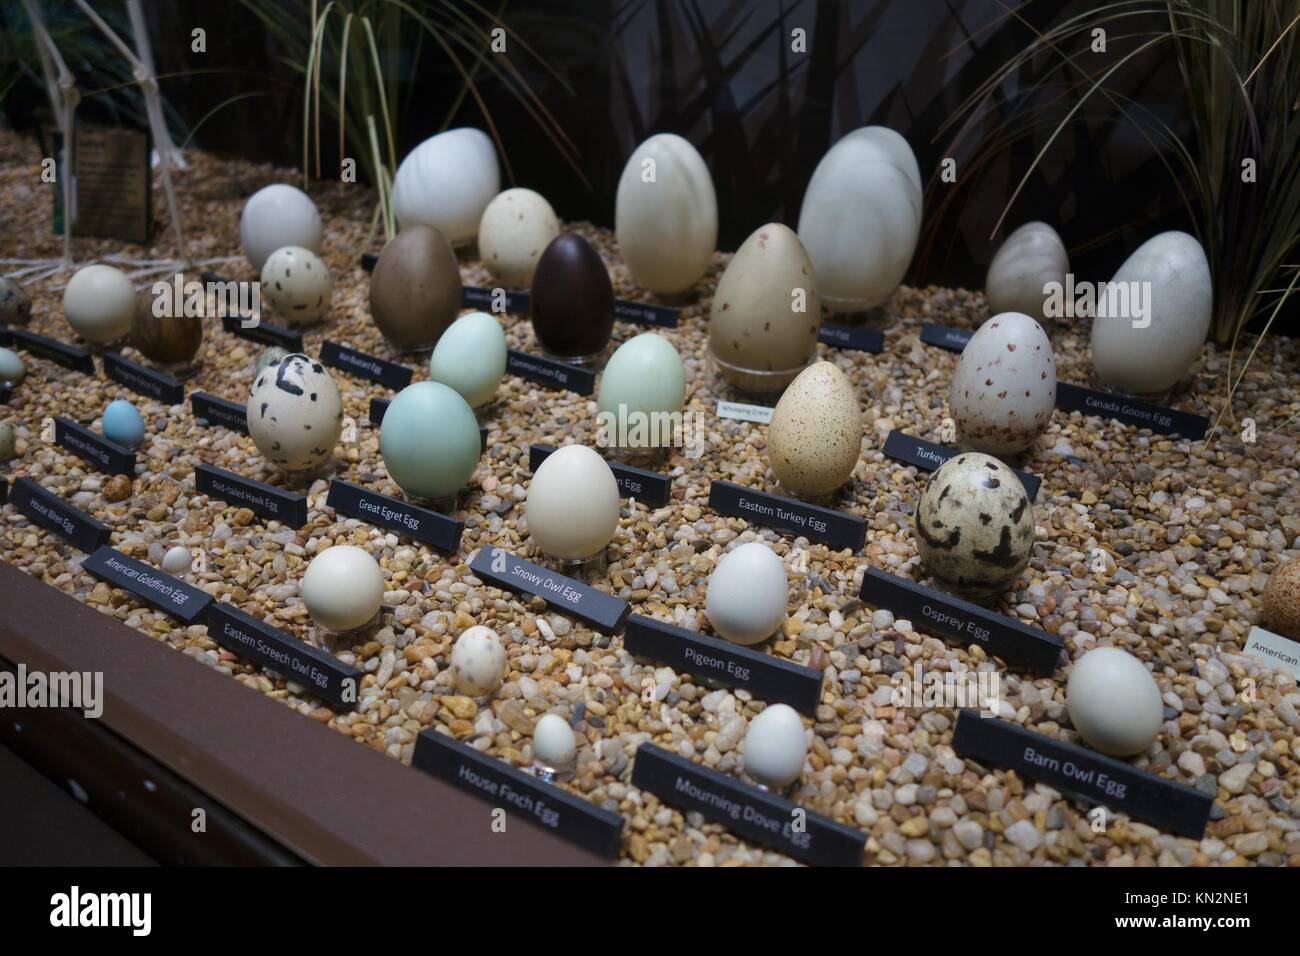 A display of different types of eggs, at the Skeletons Museum of Osteology  in Orlando, Florida, USA Stock Photo - Alamy